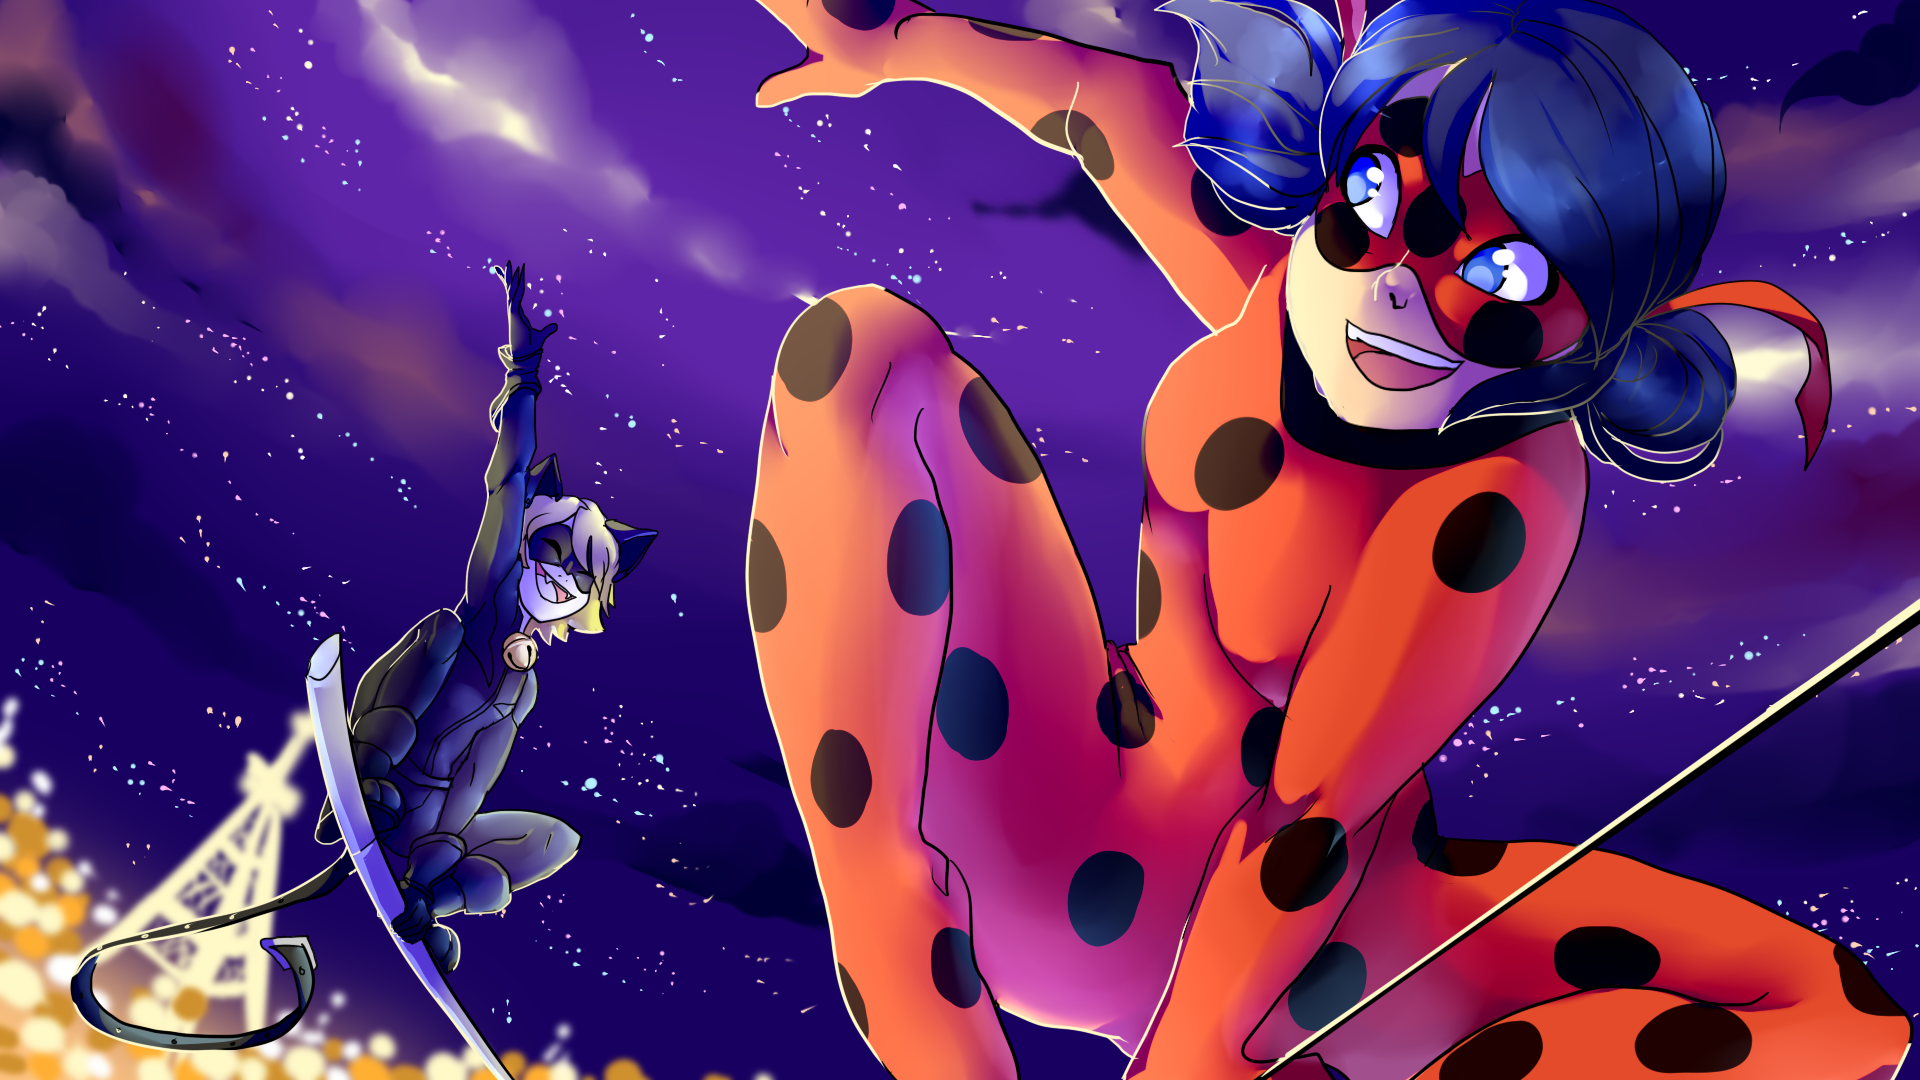 18 Miraculous Ladybug Hd Wallpapers Background Images